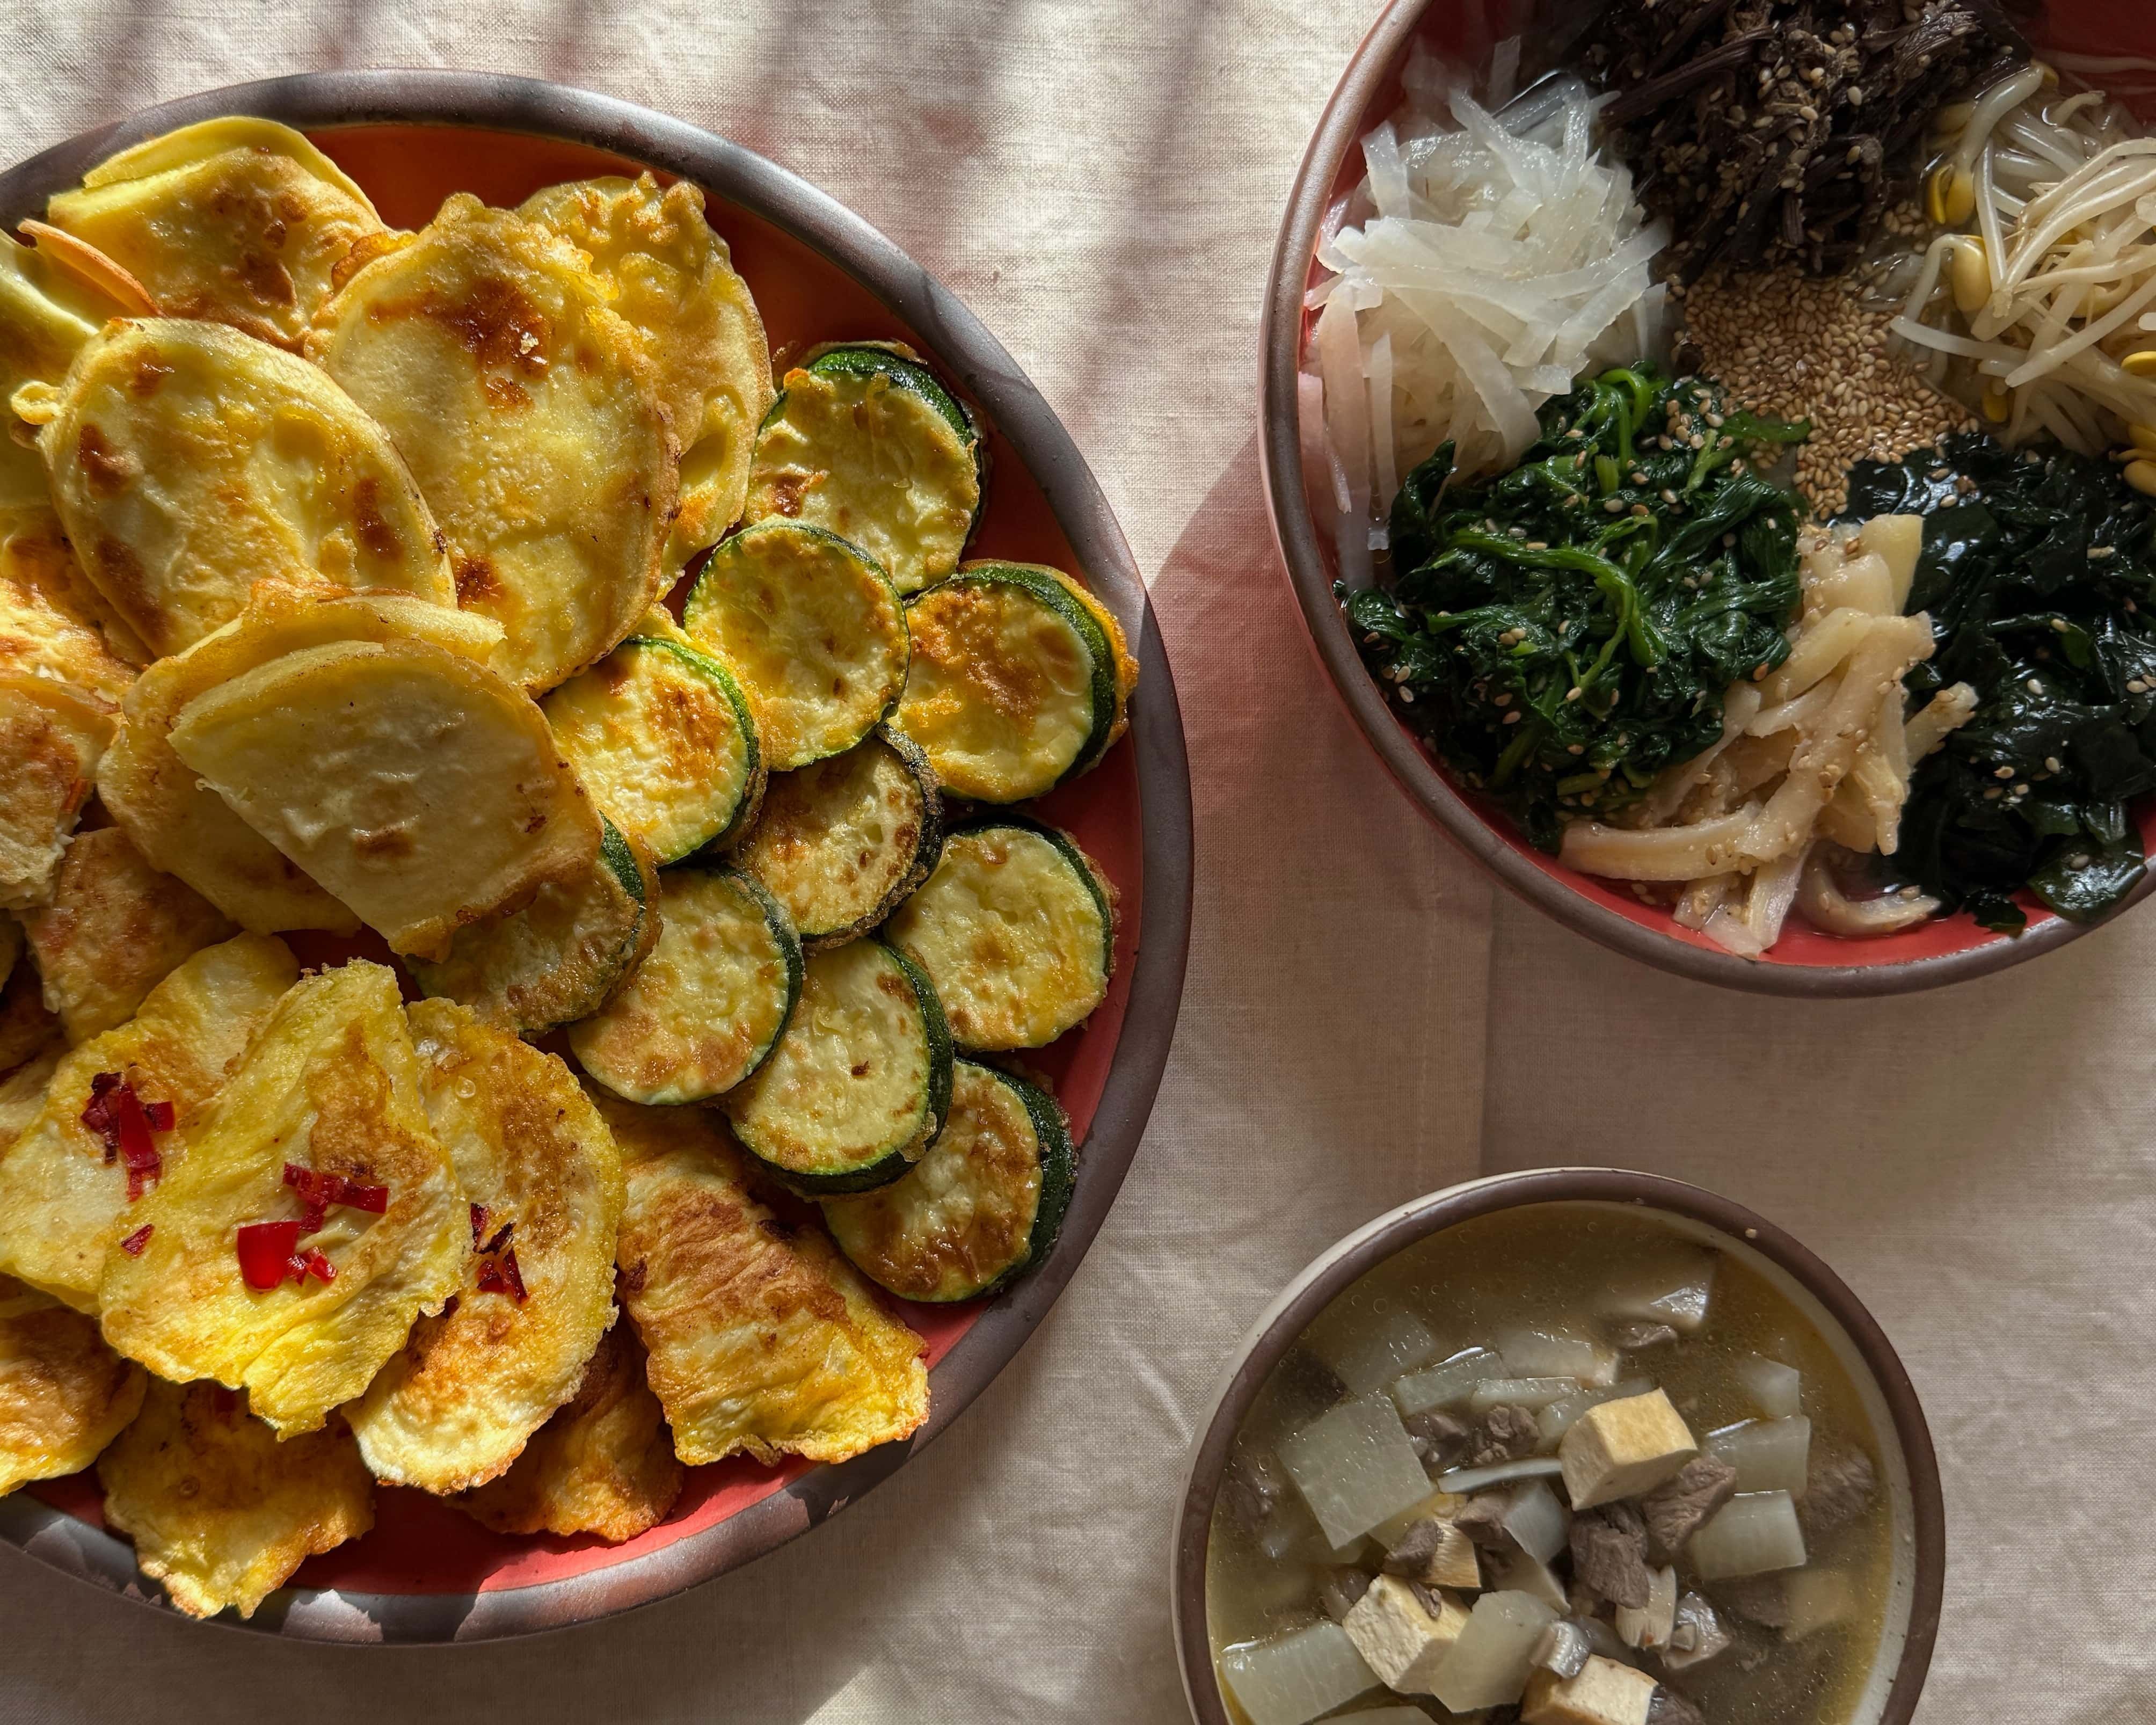 An overhead view of a Korean Lunar New Year spread of foods plated on ceramic plates and bowls